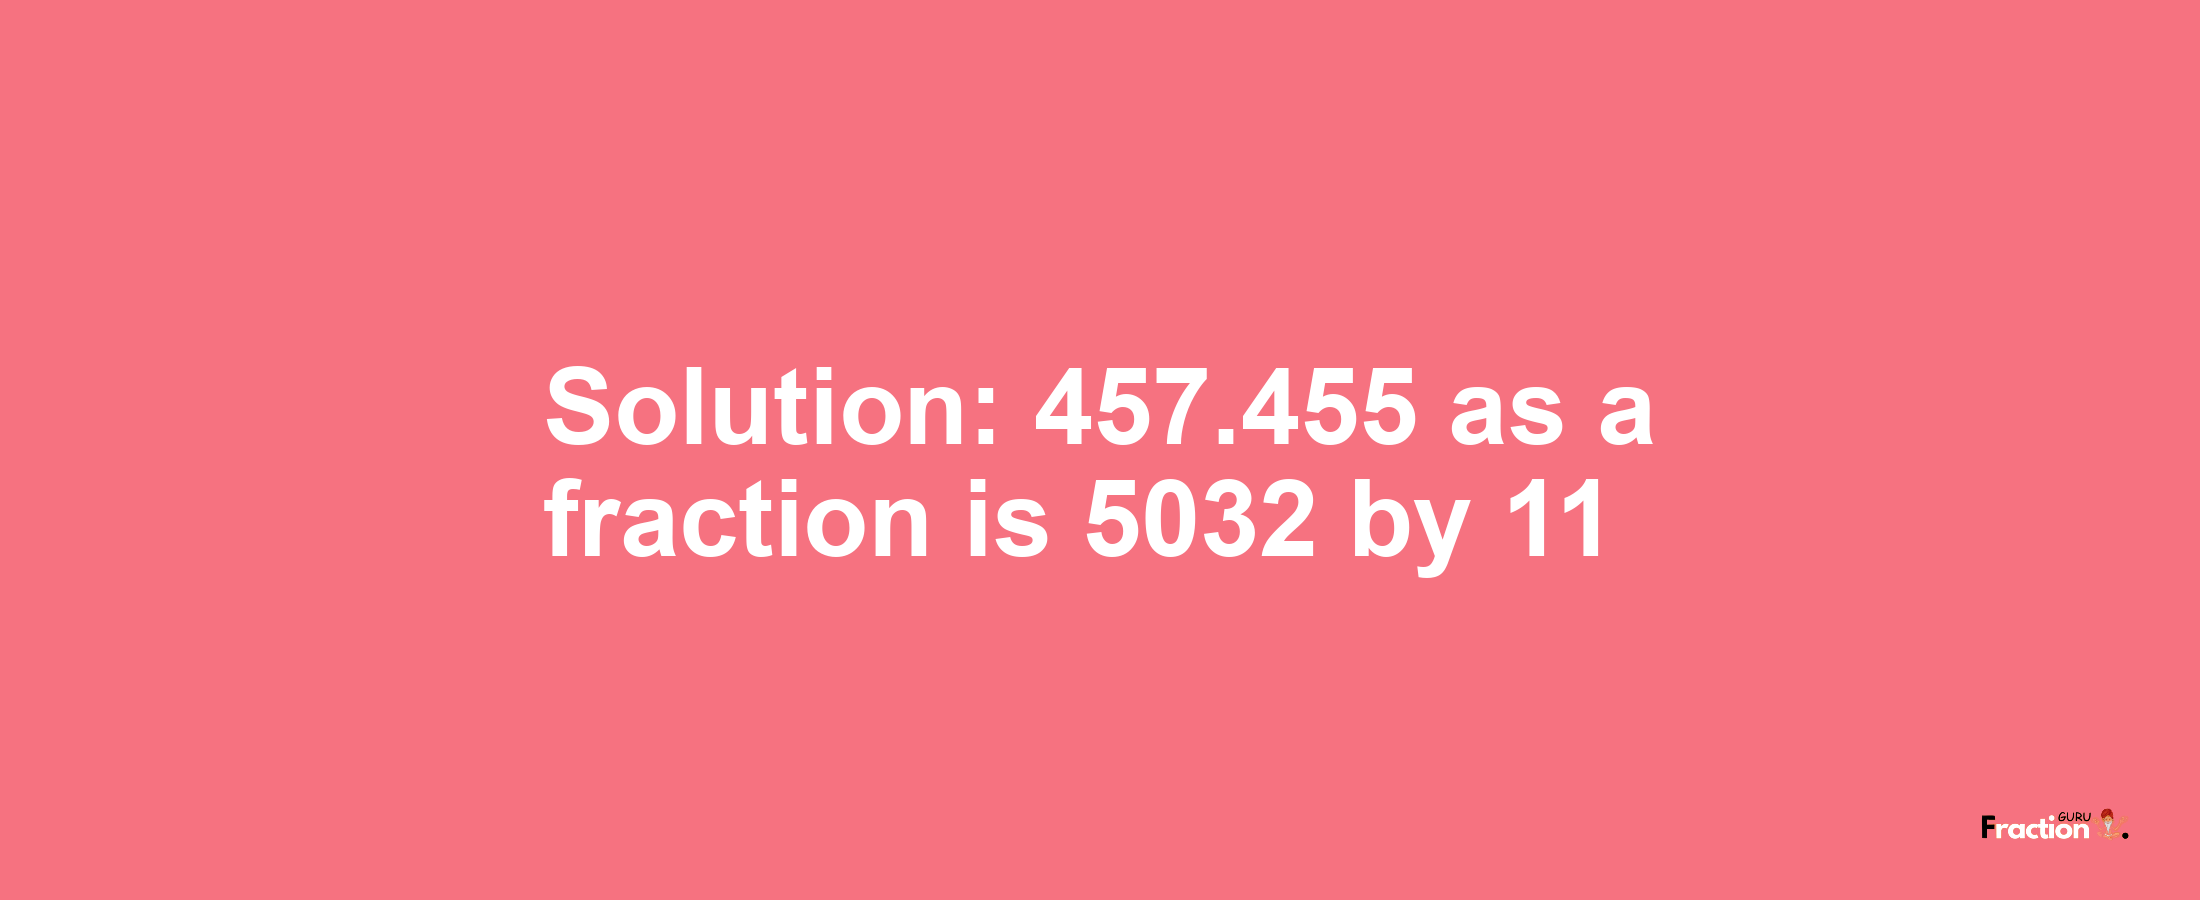 Solution:457.455 as a fraction is 5032/11